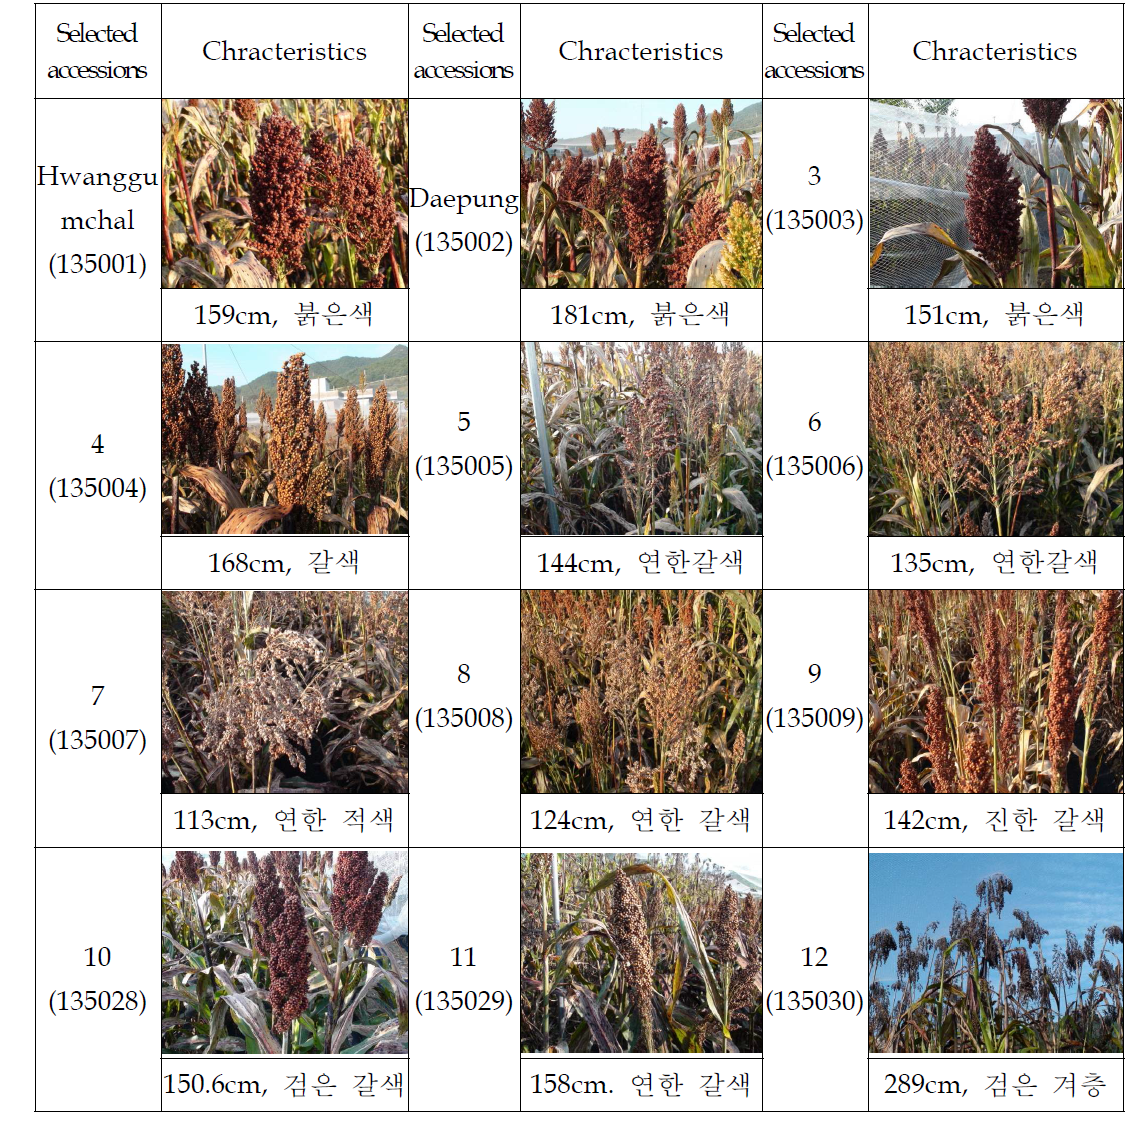 Characteristics of plant heights, ears and grain of selected sorghums